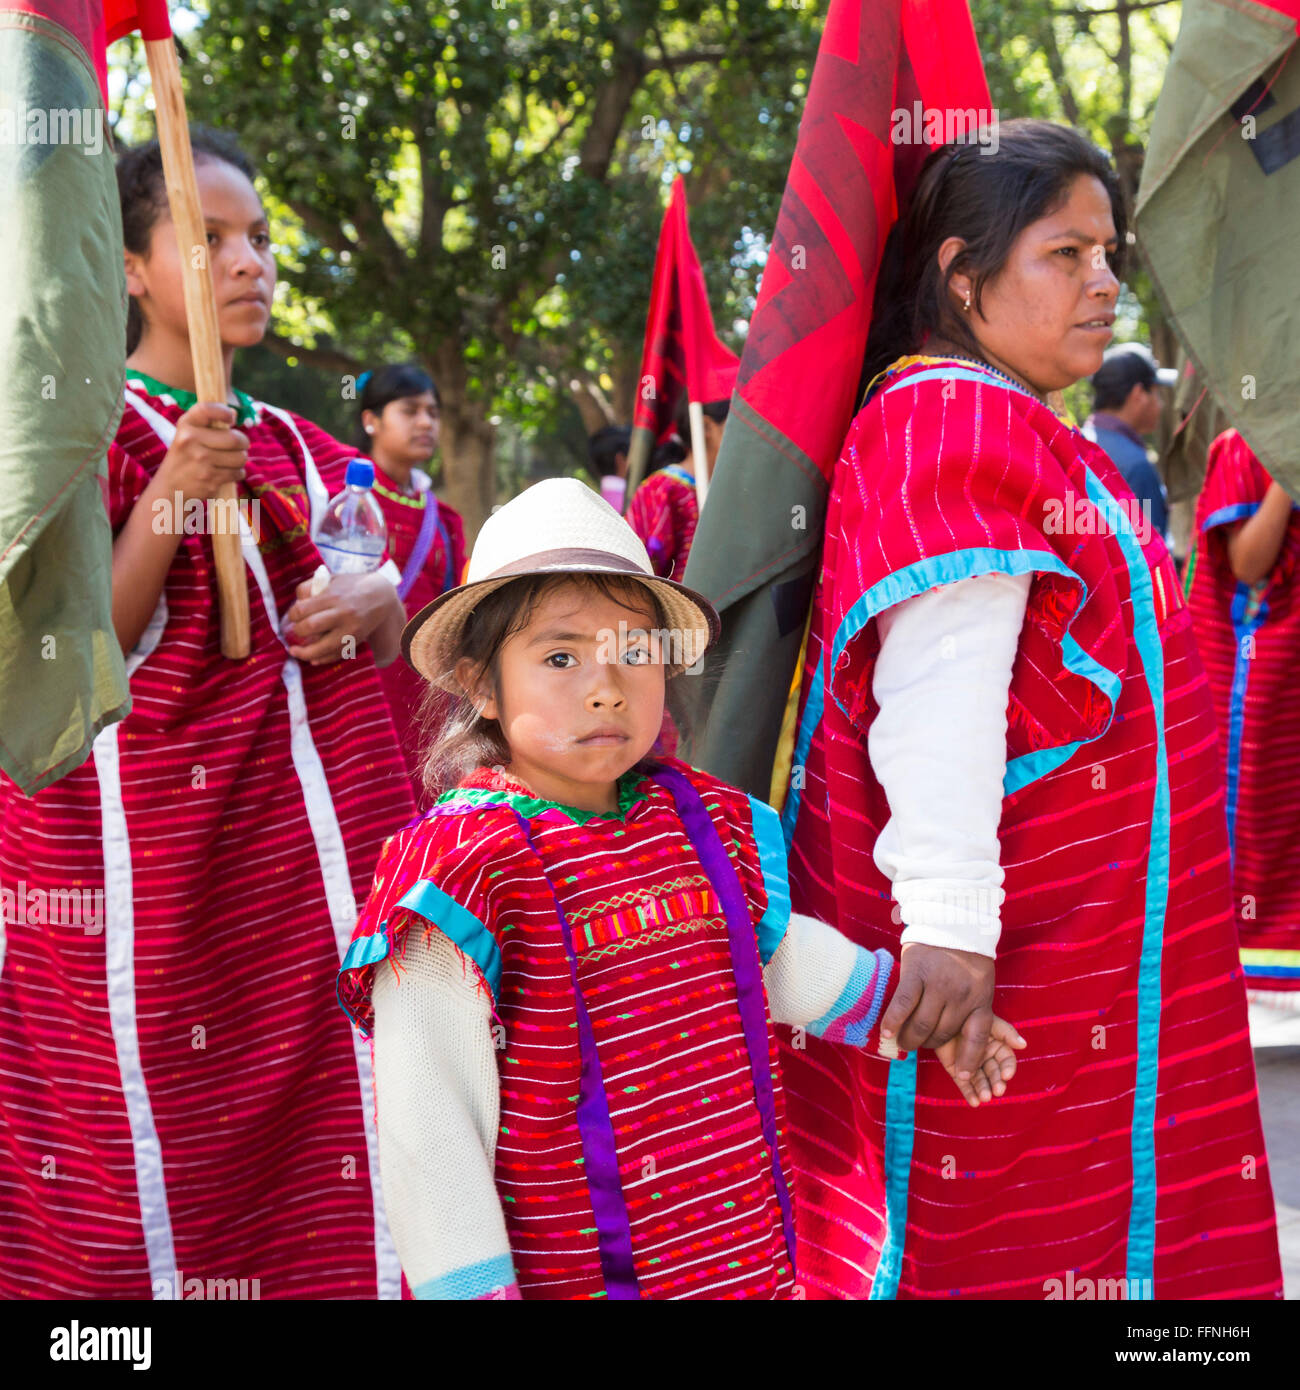 Oaxaca, Mexico - Members of the Triqui ethnic group protest displacement from their homes and violence in their region. Stock Photo